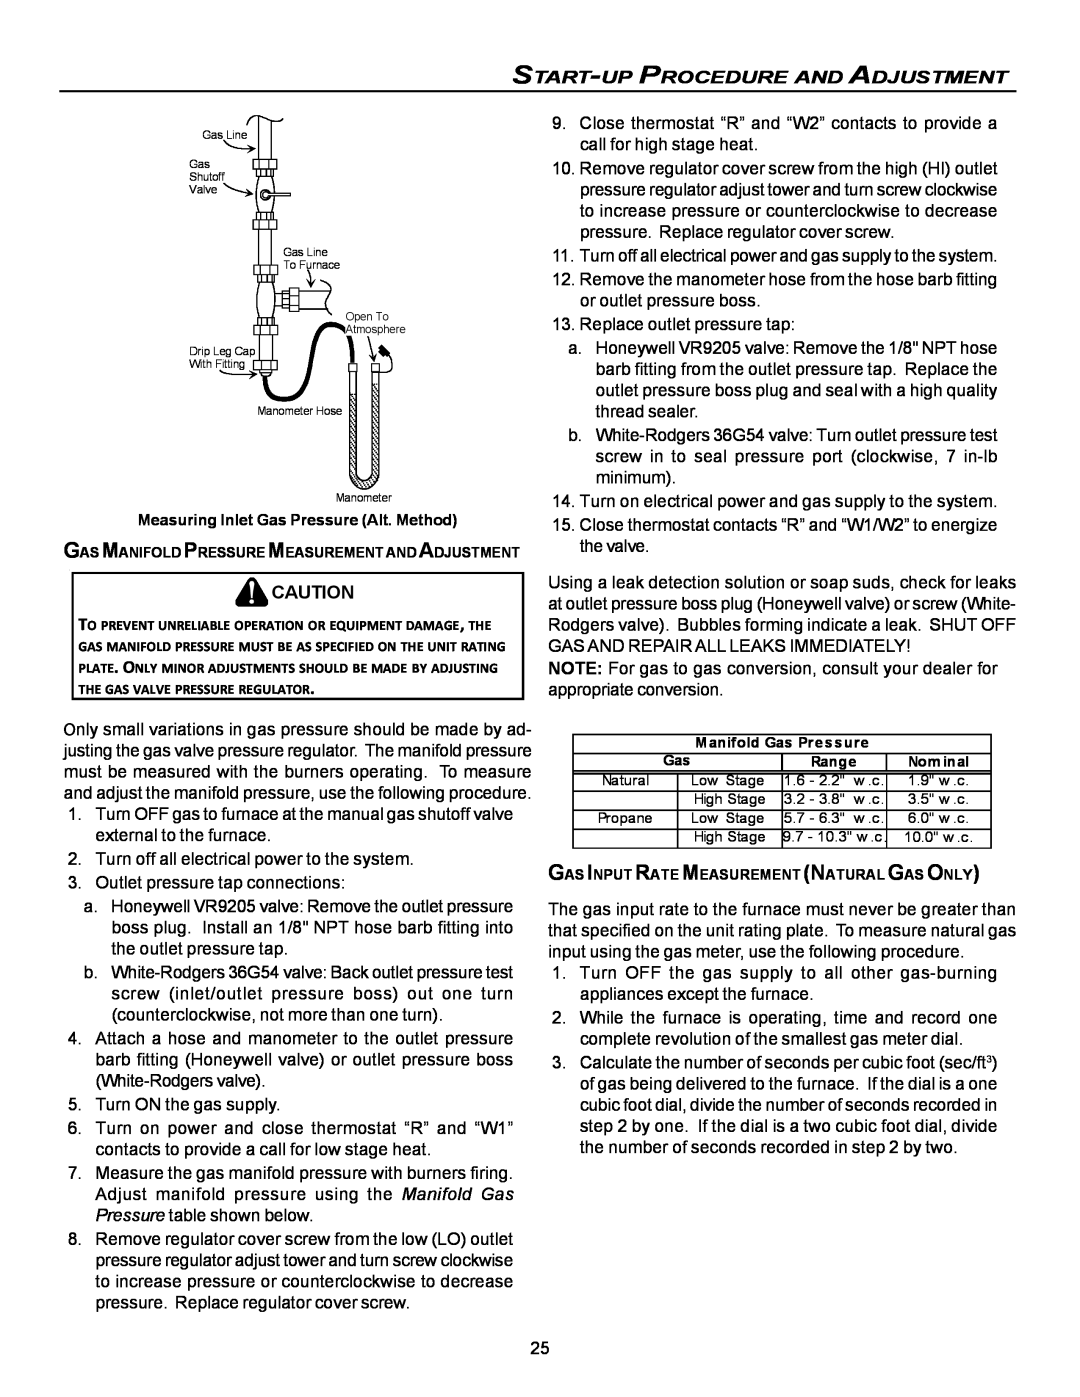 Goodman Mfg VC8 instruction manual Start-Up Procedure And Adjustment, Turn off all electrical power to the system 